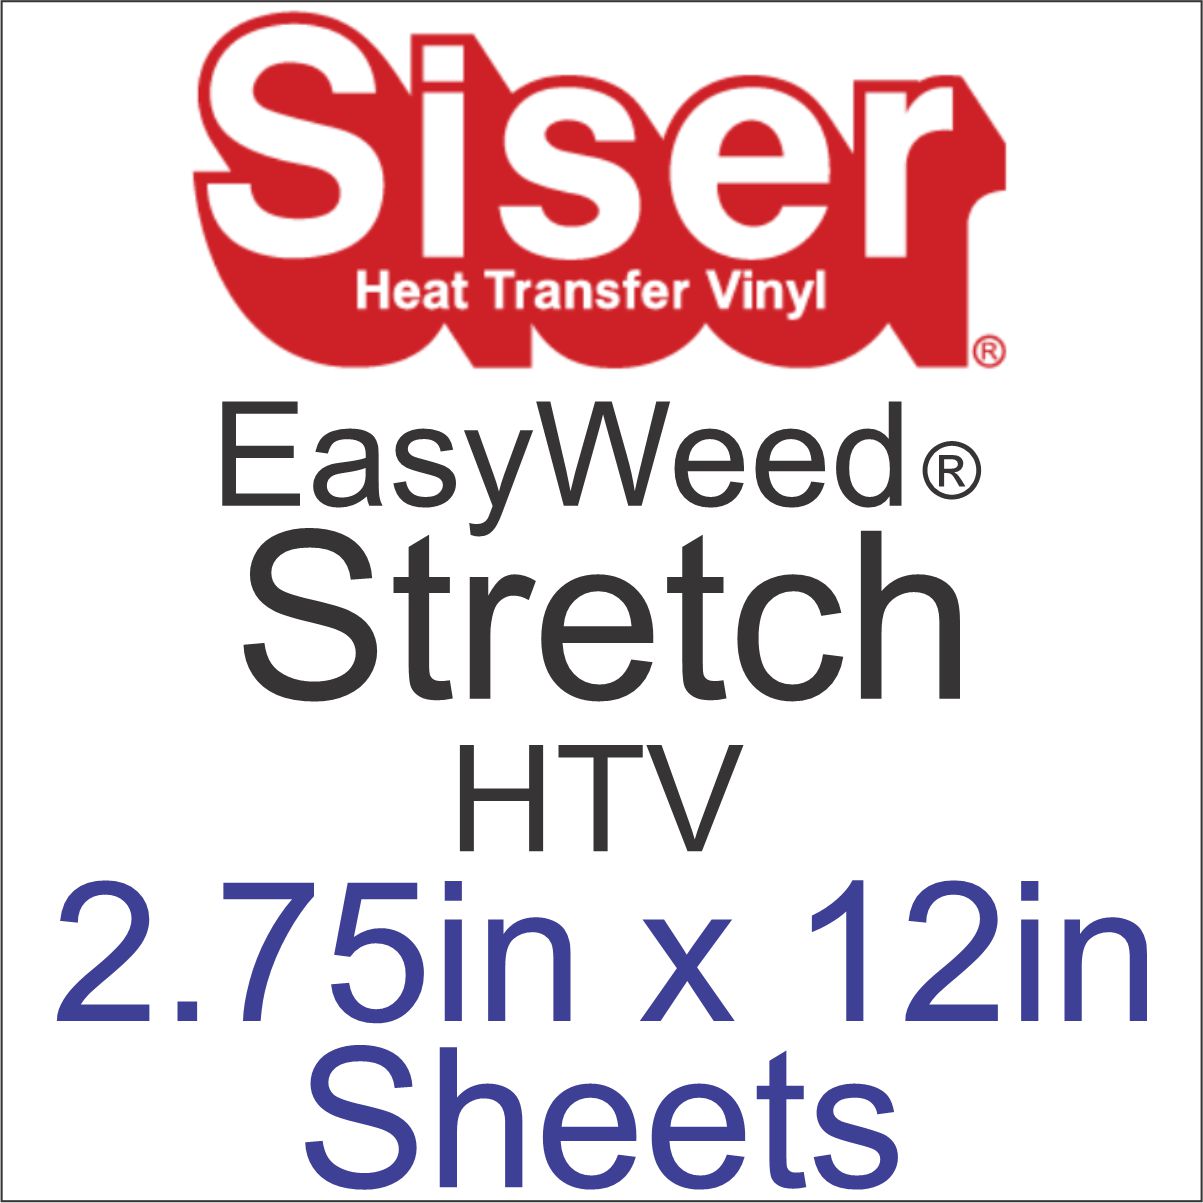 Siser EasyWeed STRETCH HTV 2.75in x 12in Sheets CLEARANCE